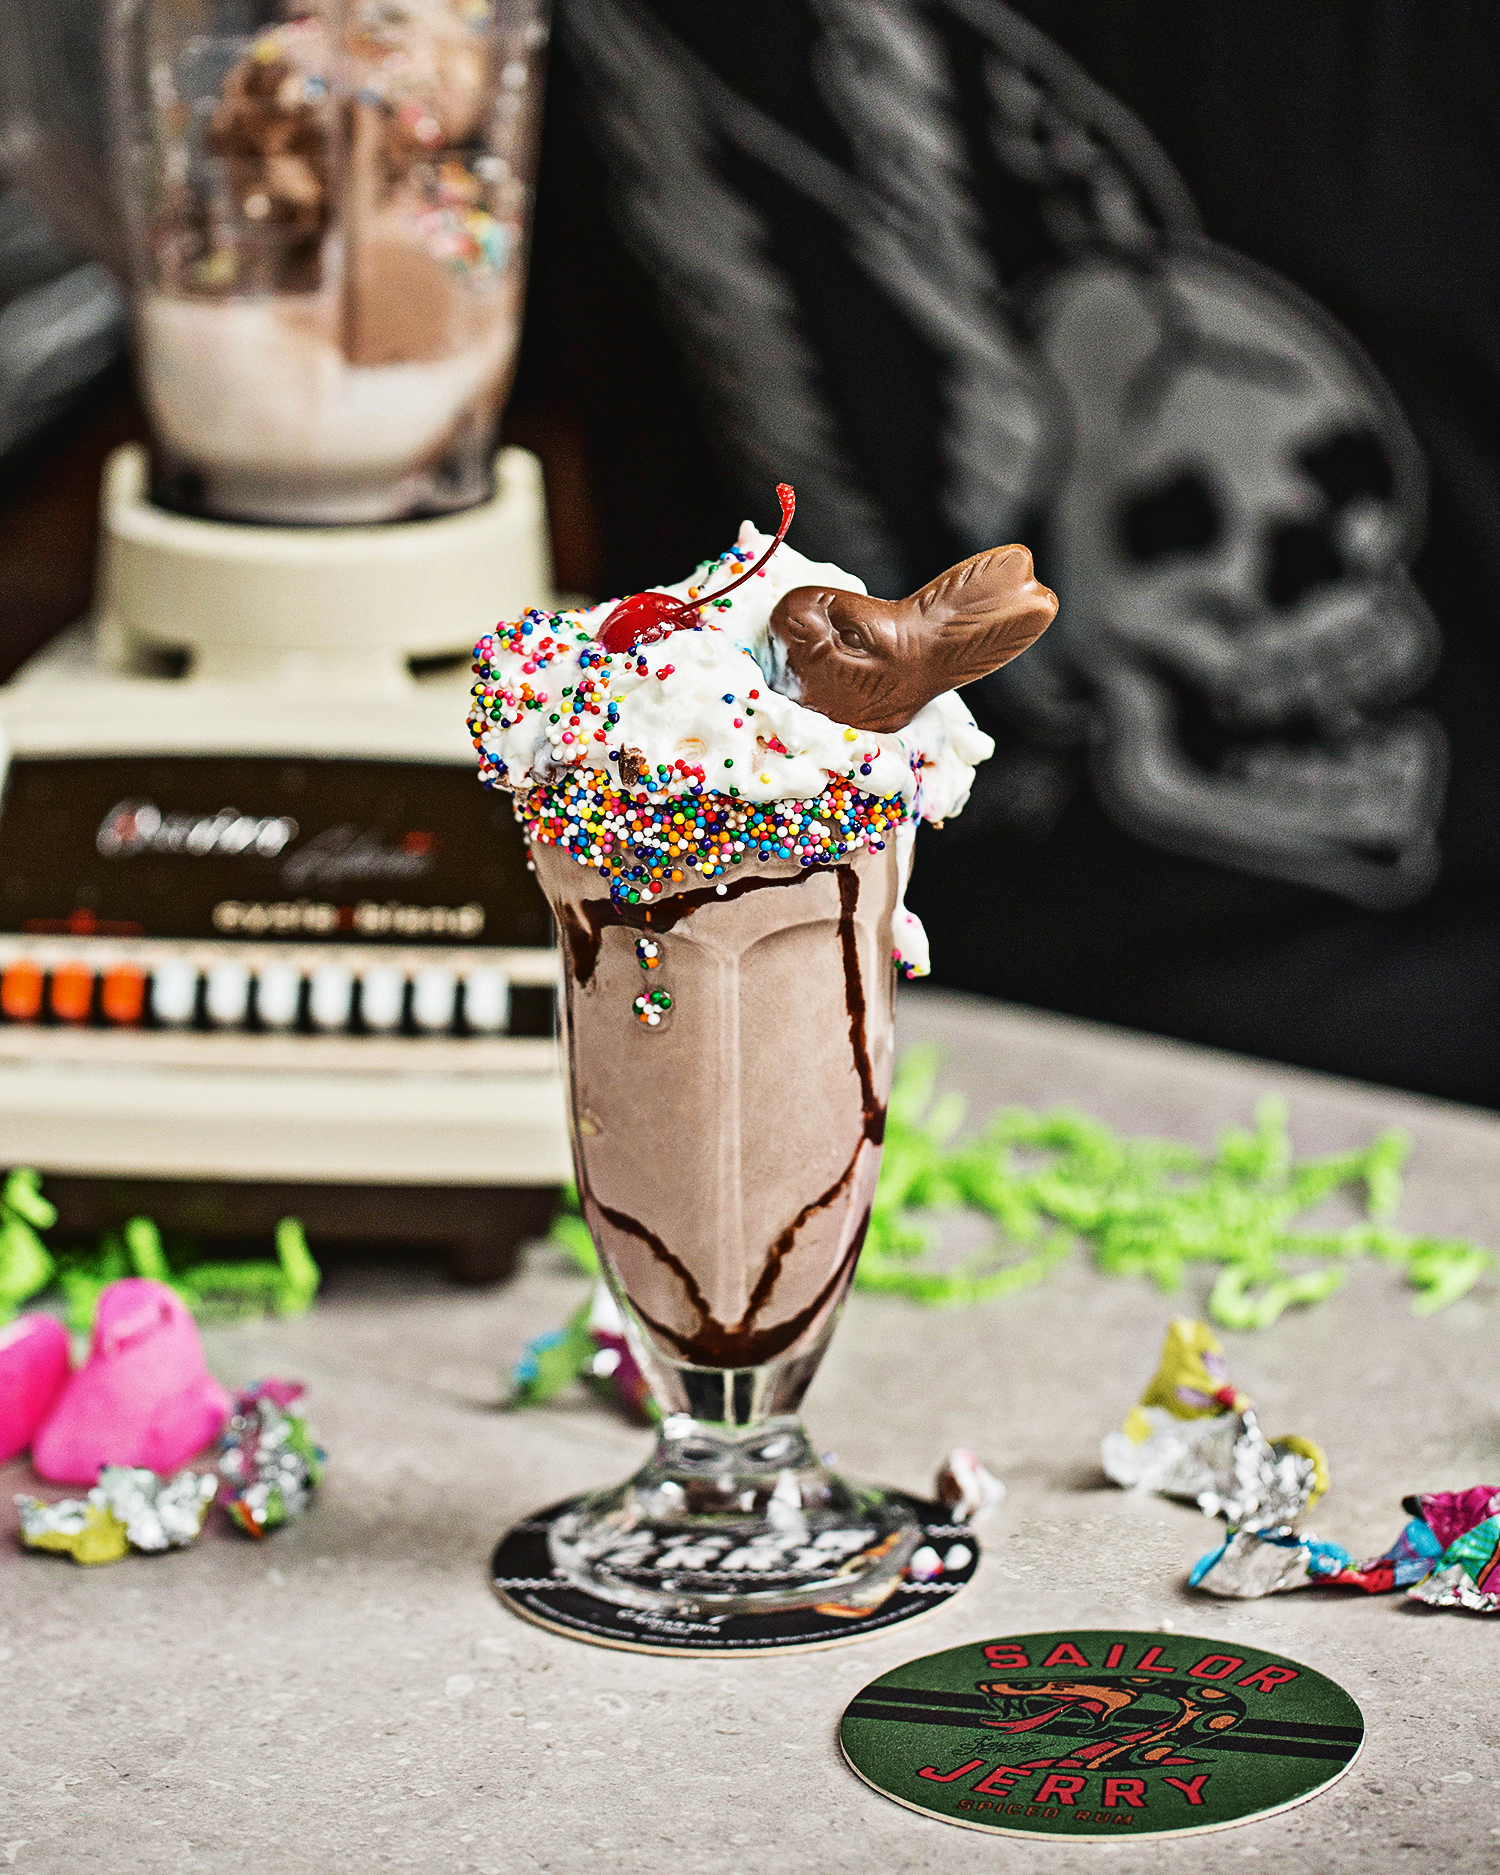 Recipe: Sailor Jerry's Easter Simple Hard Shake